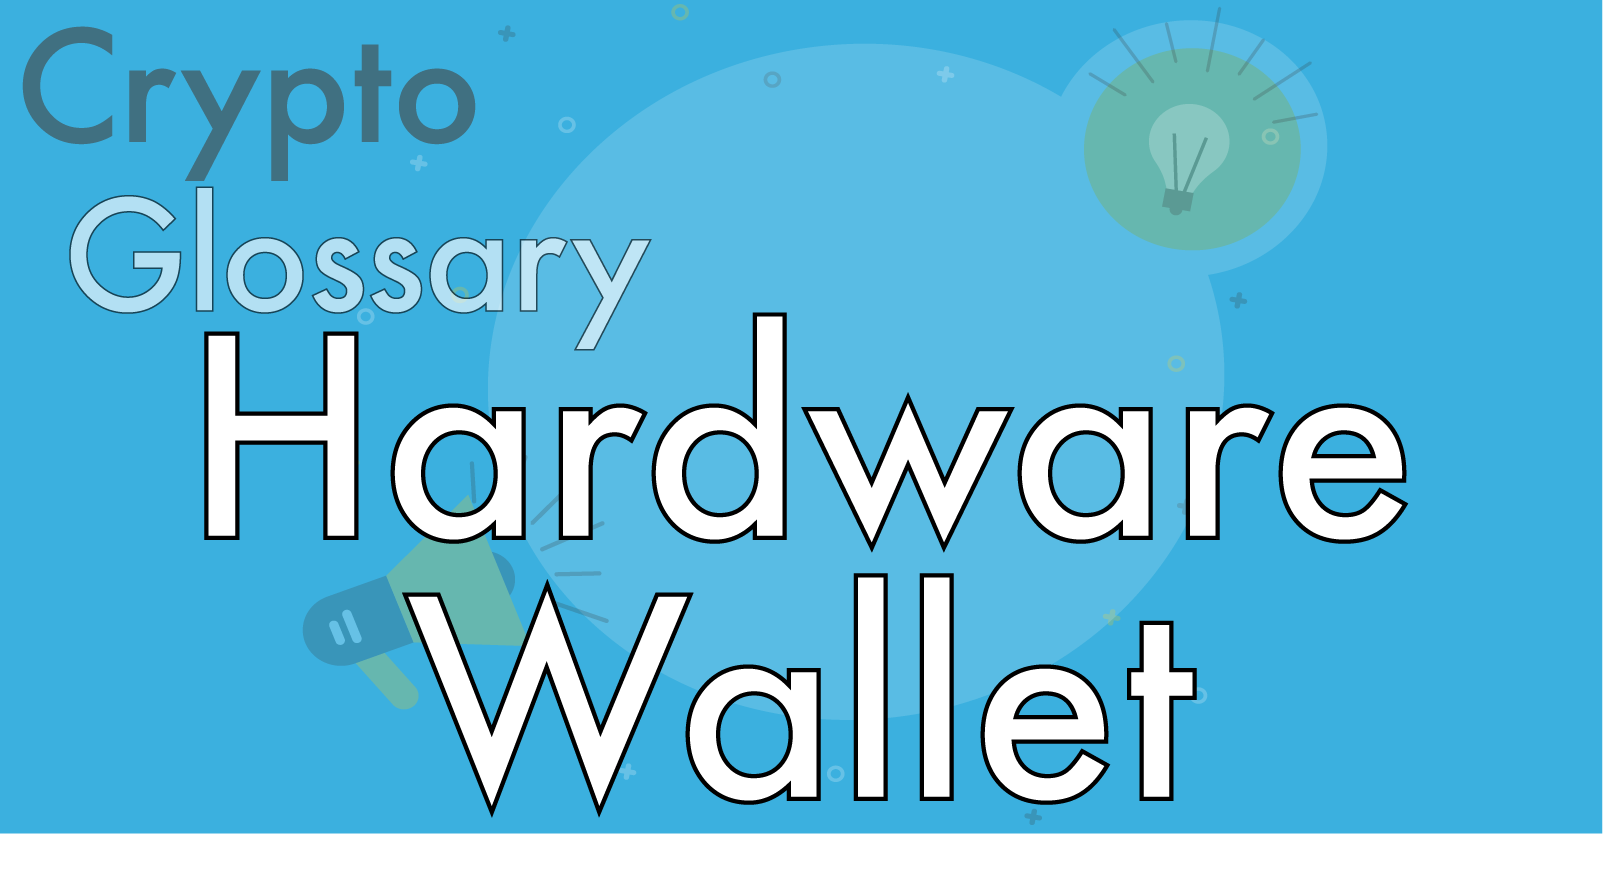 What is a Hardware Wallet and How Does it Work?